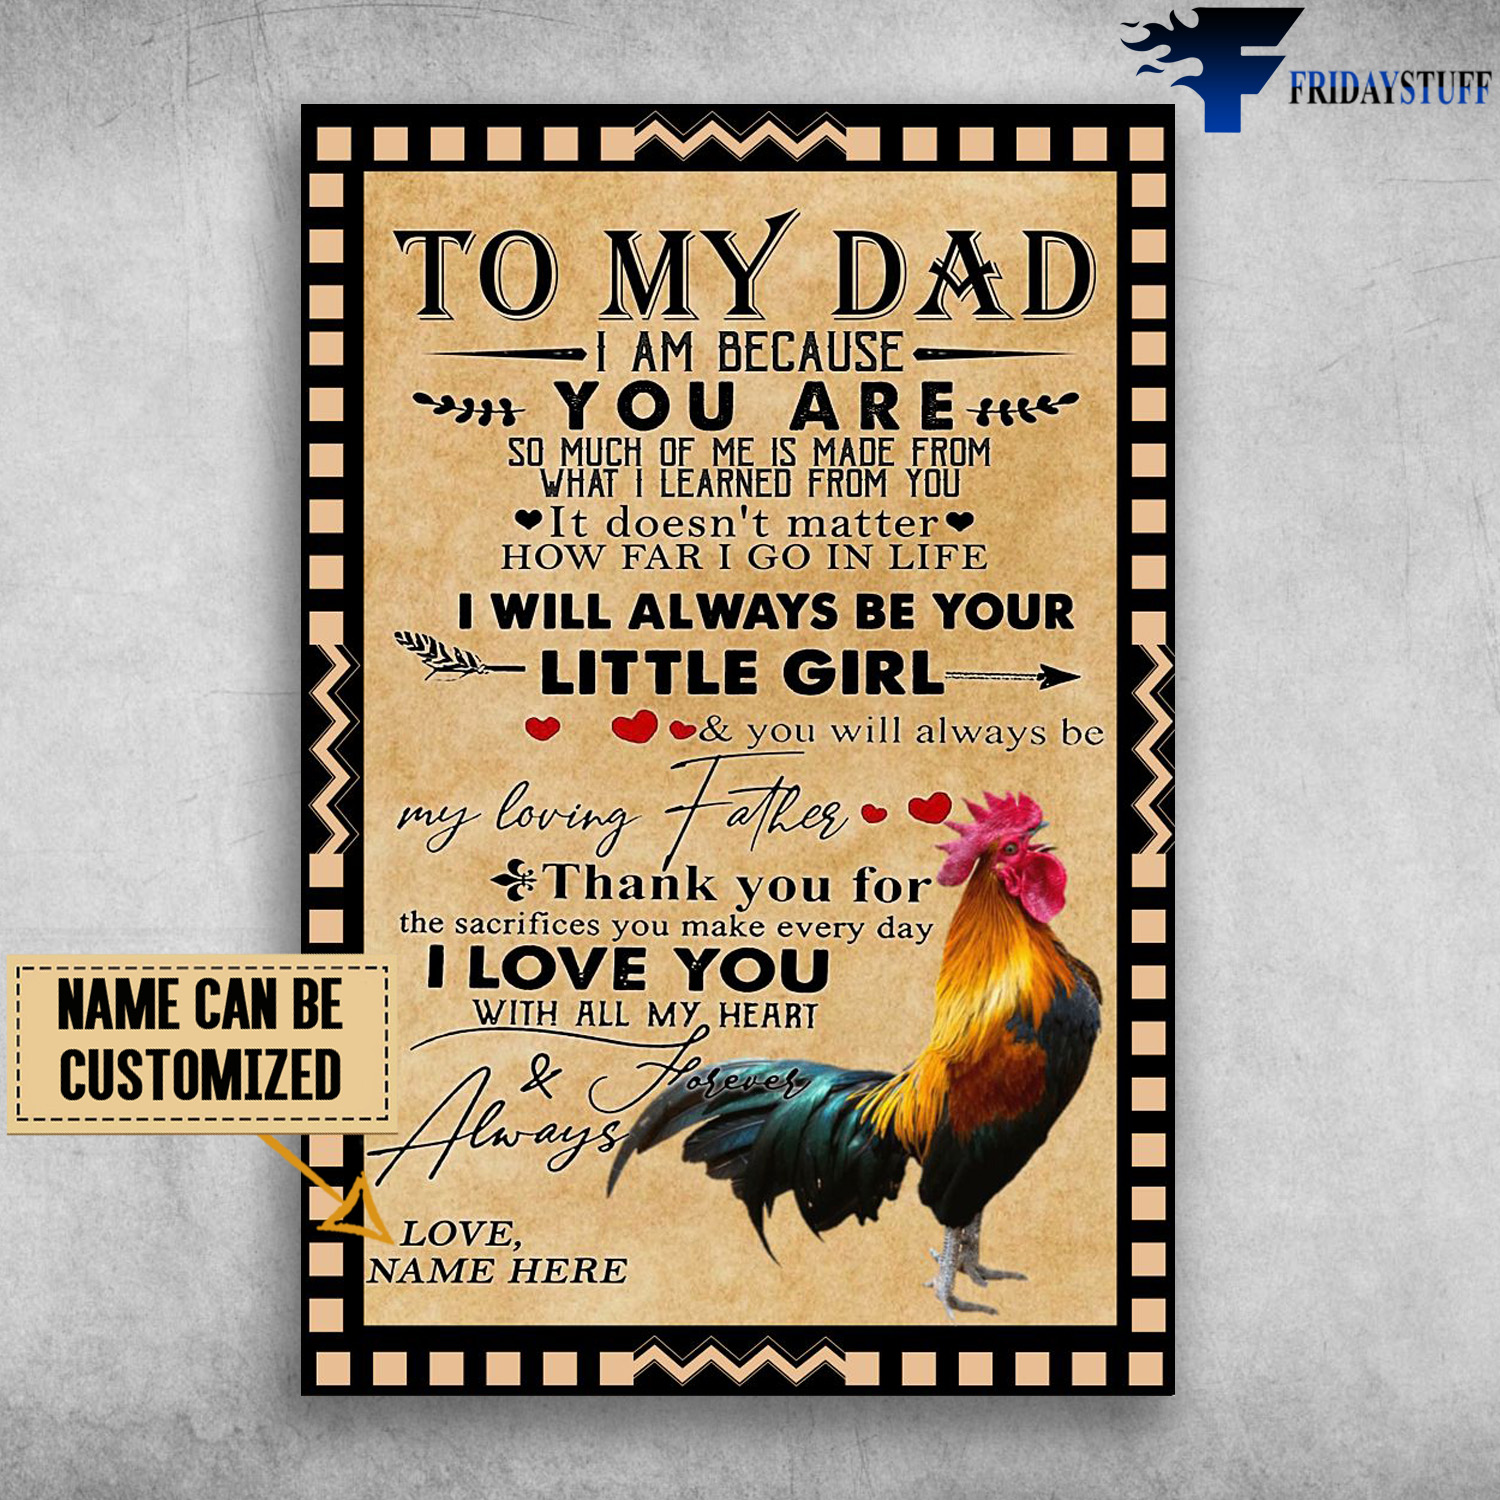 Rooster Dad And Daughter, To My Dad, I Am Because You Are, So Much Of Me Is Made From, What I Learned From You, It Doesn't Matter, How Far I Go In Life, I Will Always Be Your Little Girl, And You Will Always Be My Loving Father